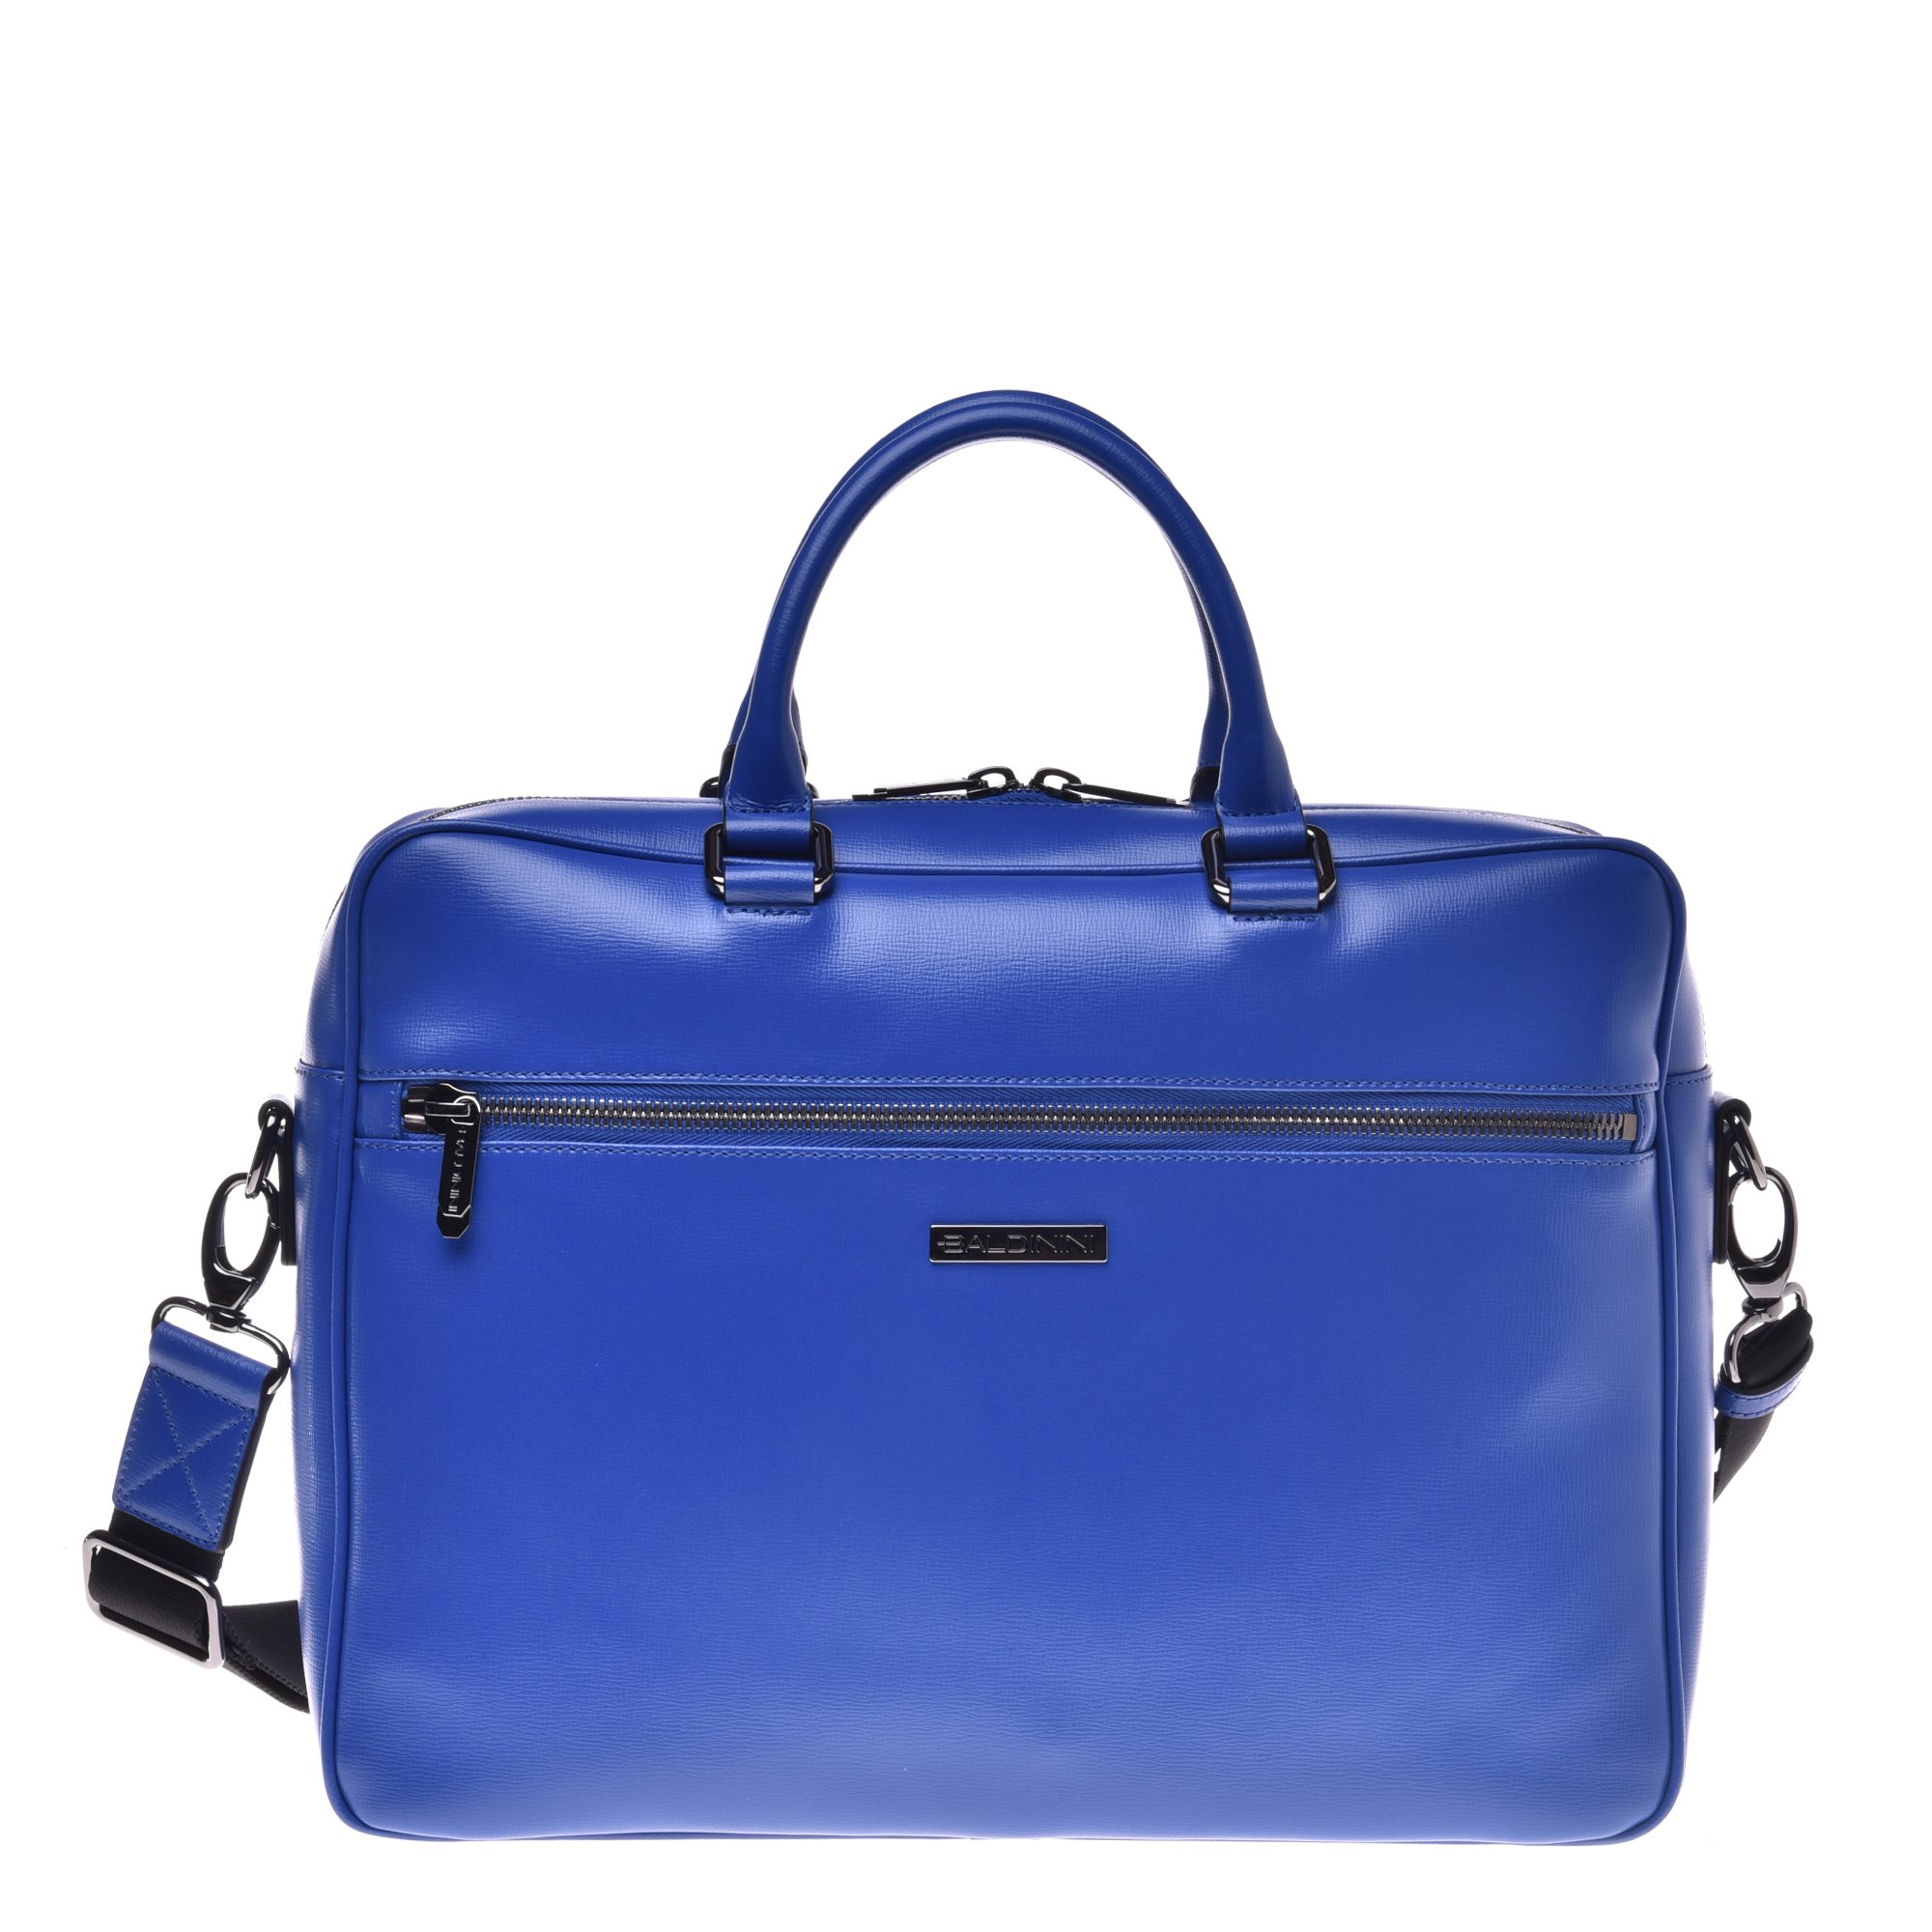 Professional bag in electric blue saffiano image